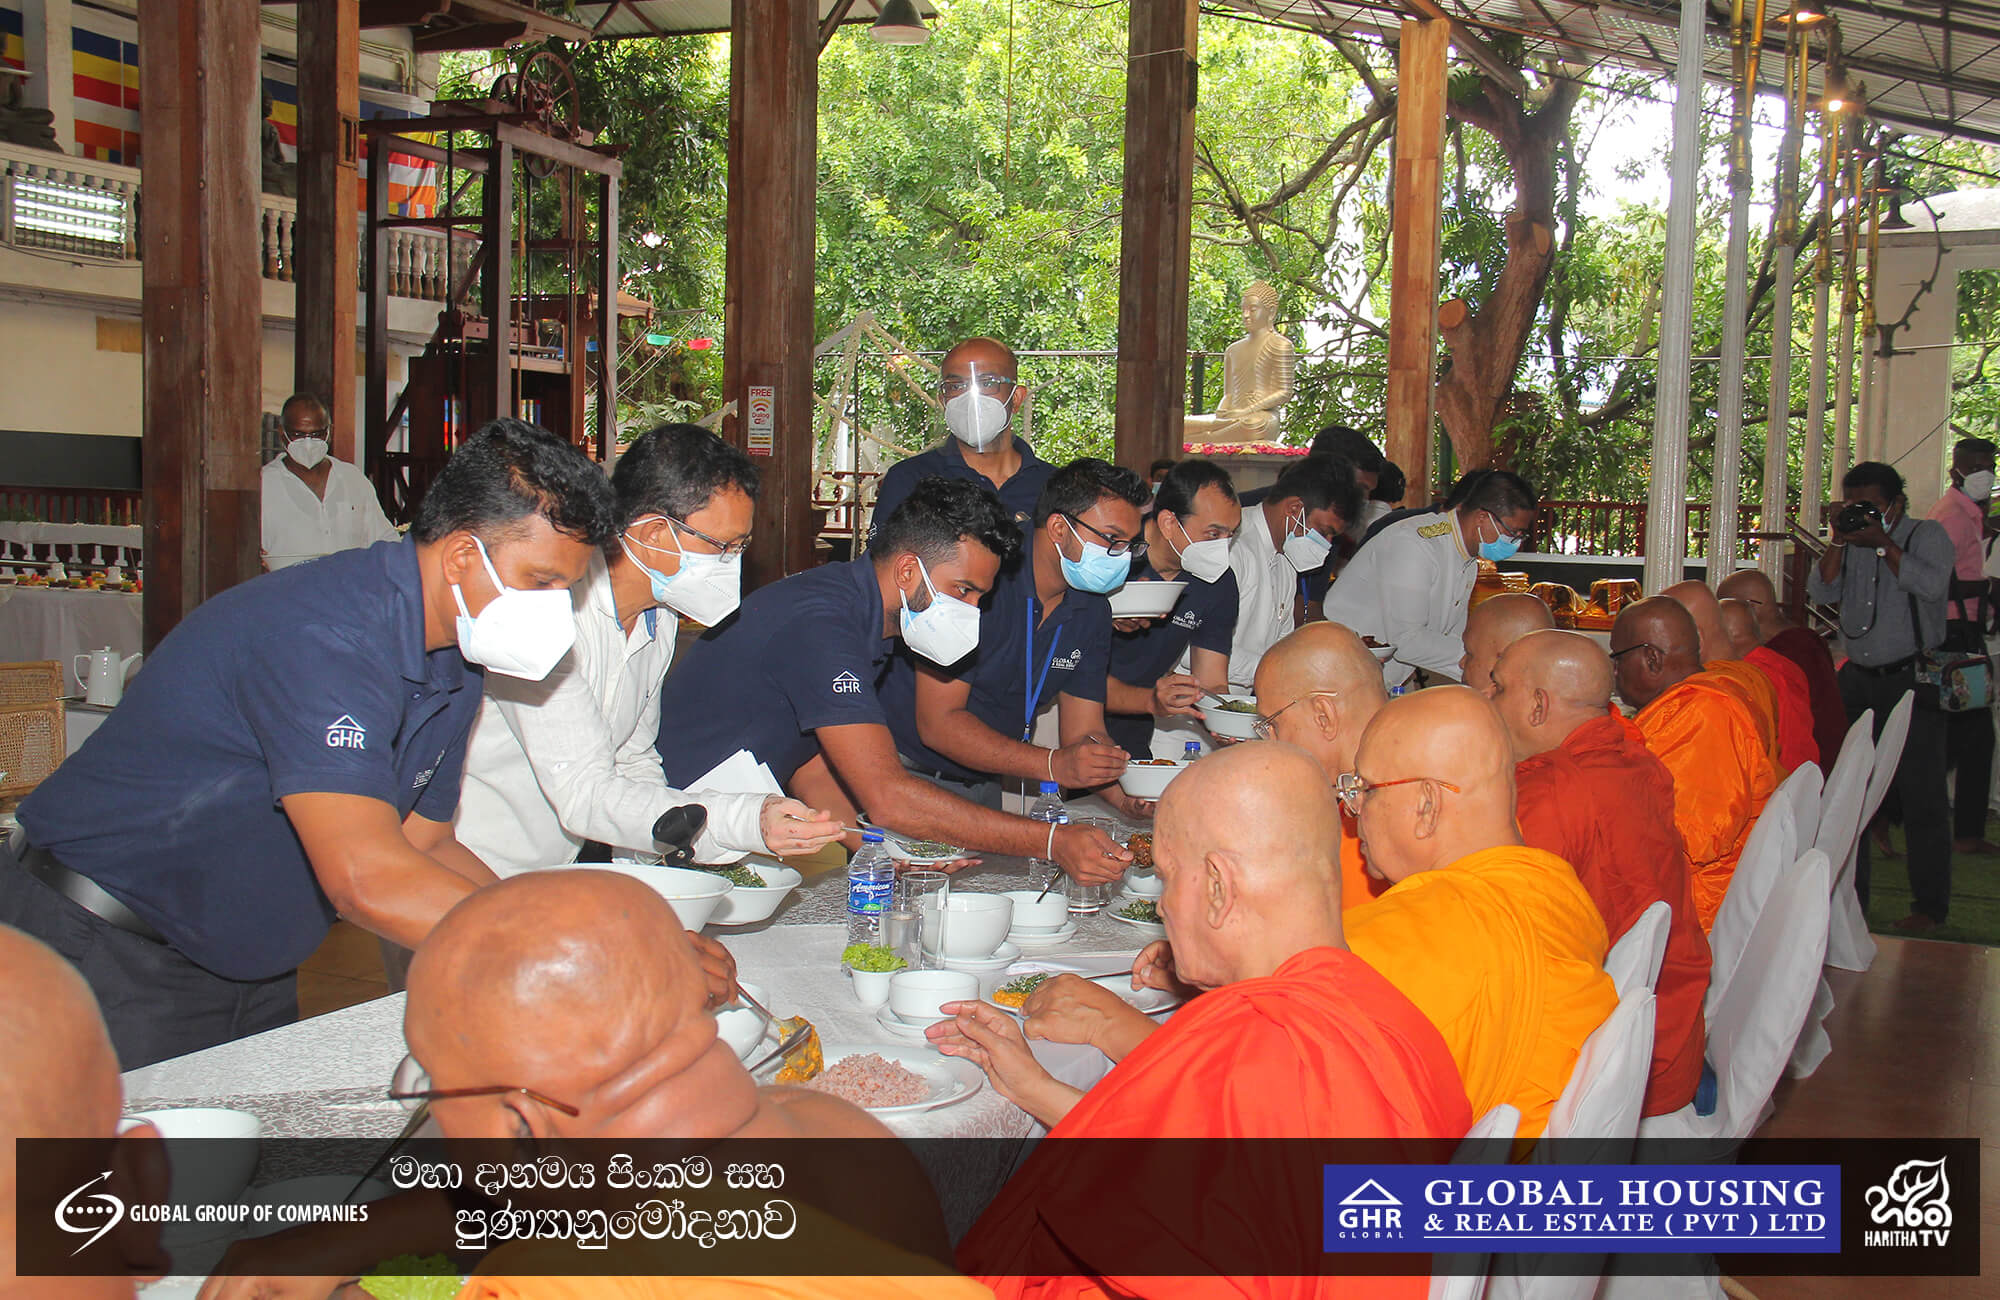 An image of people serving monks